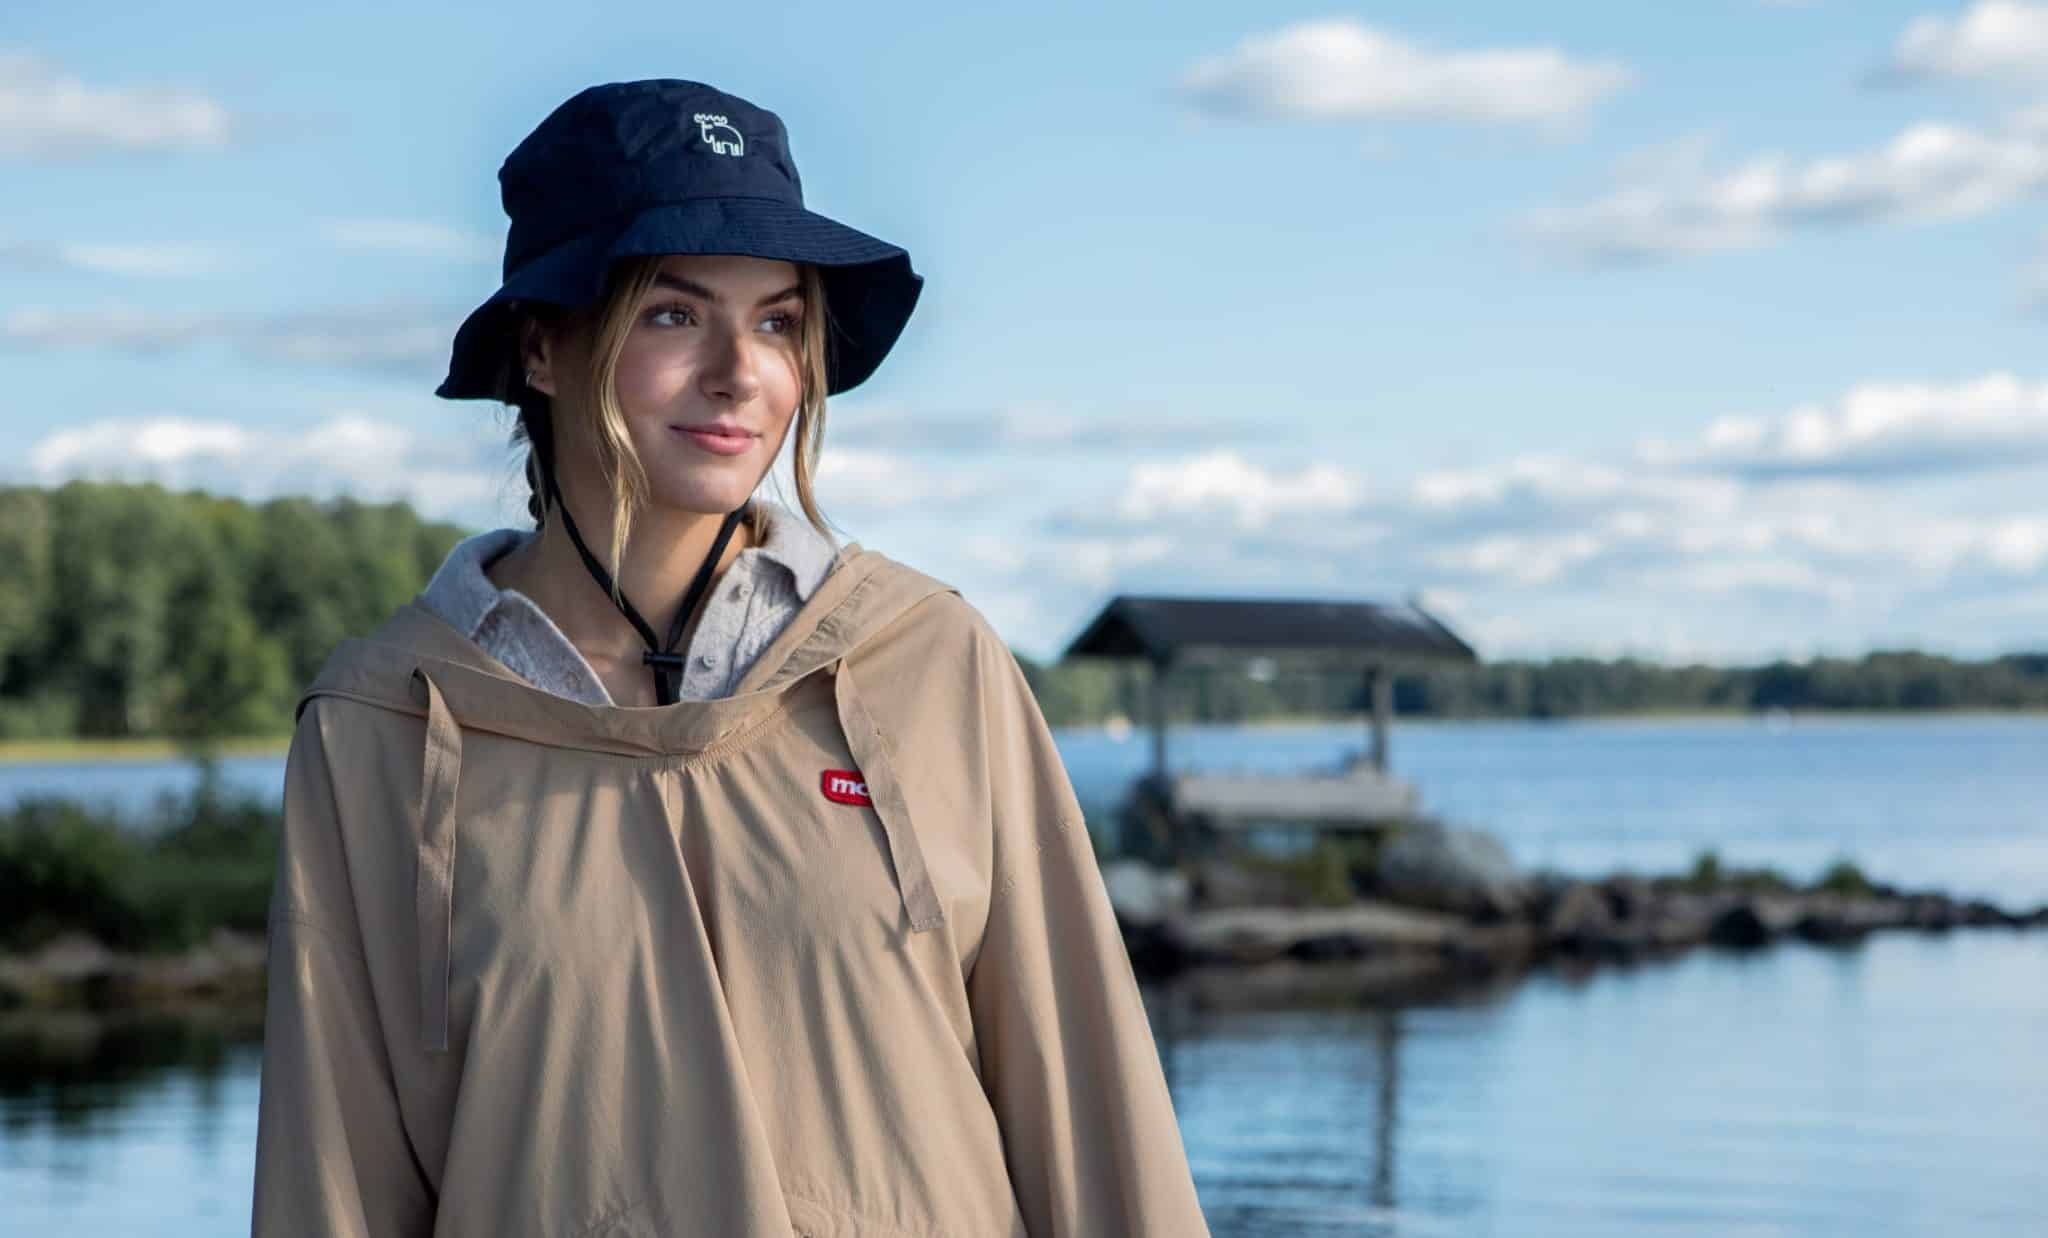 https://mozsweden.com/wp-content/uploads/2022/10/woman-in-moz-jacket-and-hat-scaled.jpg